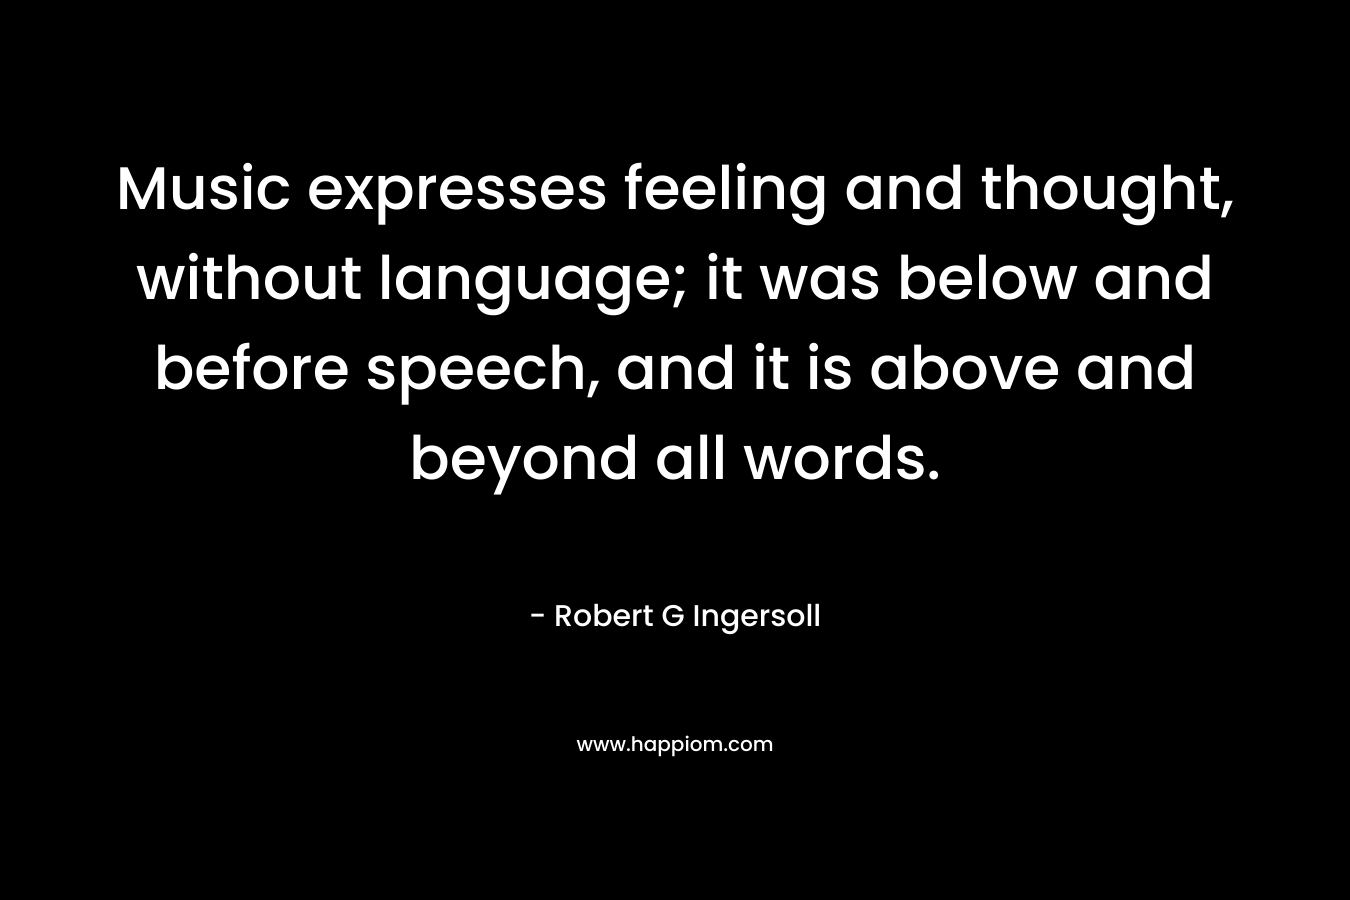 Music expresses feeling and thought, without language; it was below and before speech, and it is above and beyond all words. 